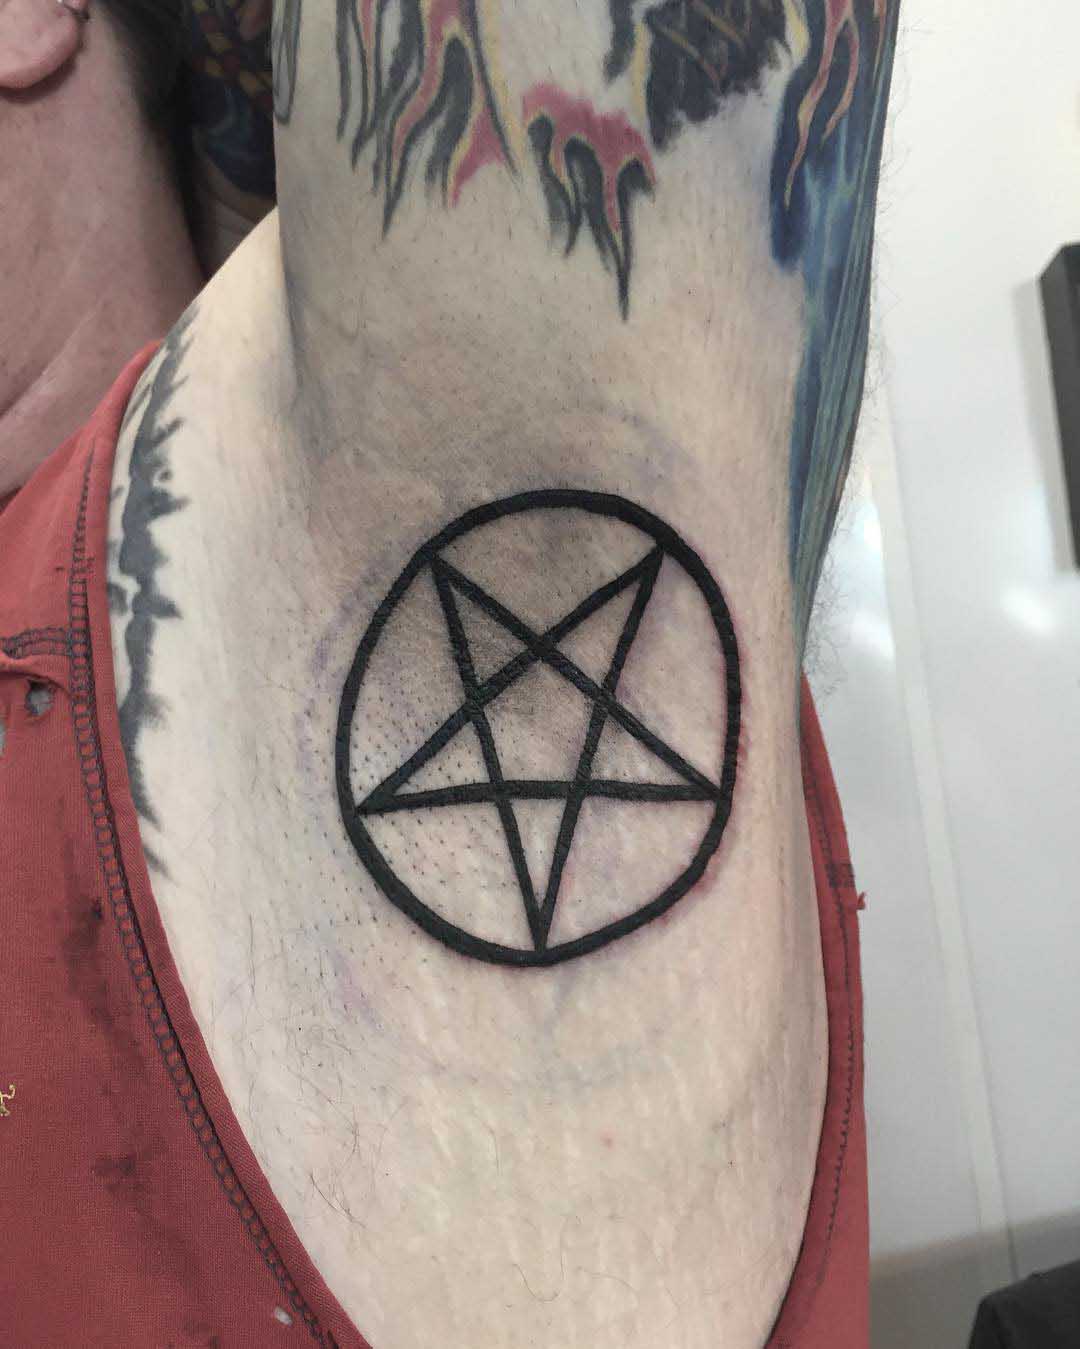 Is having a tattoo of a pentagram star without a circle around it still  considered a satanic symbol? - Quora